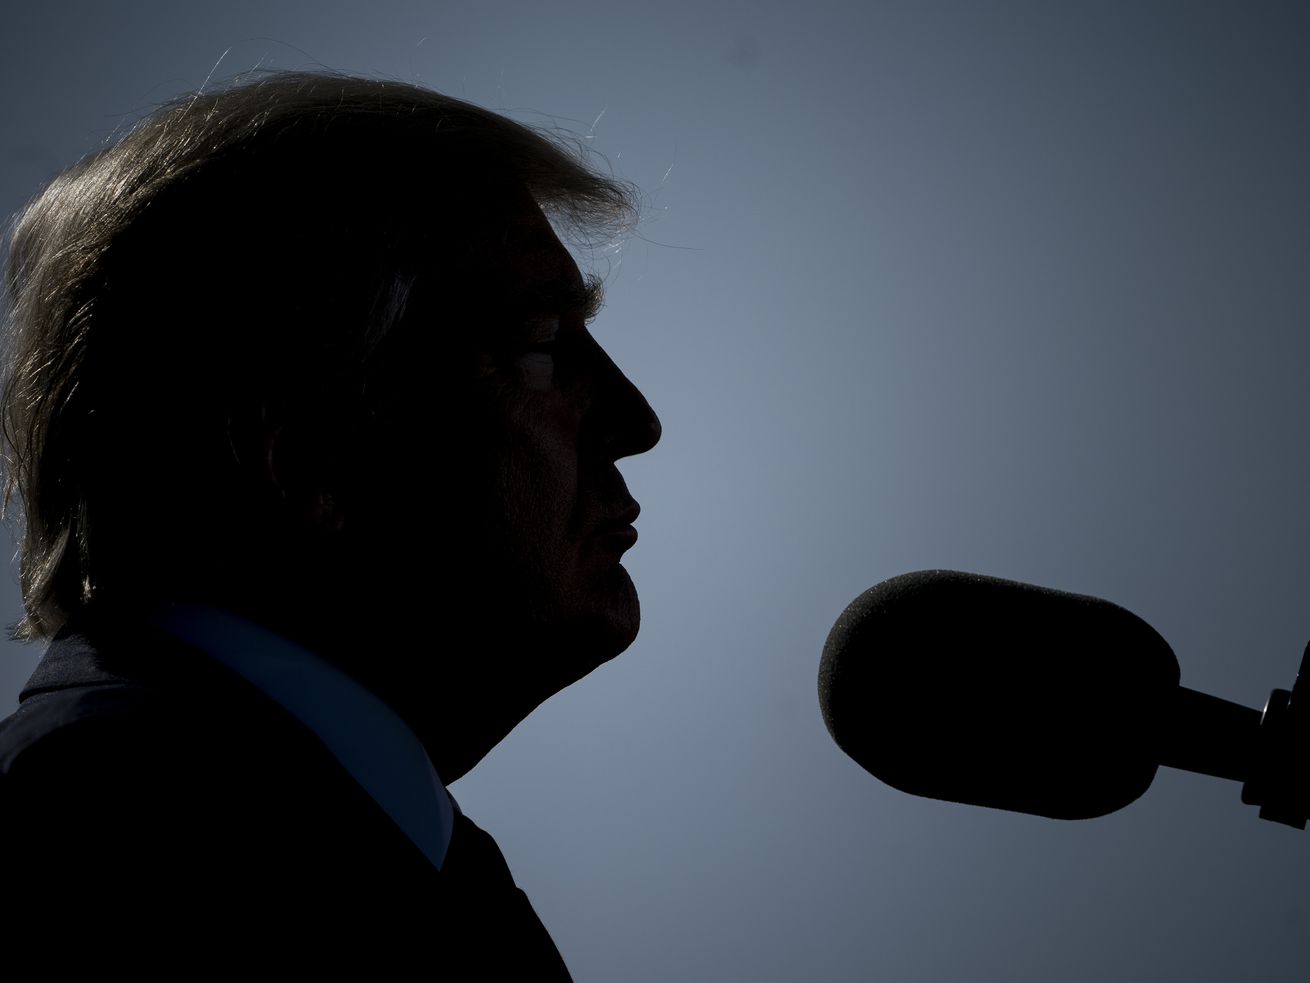 In a shadowy silhouette, Donald Trump speaks into a microphone.